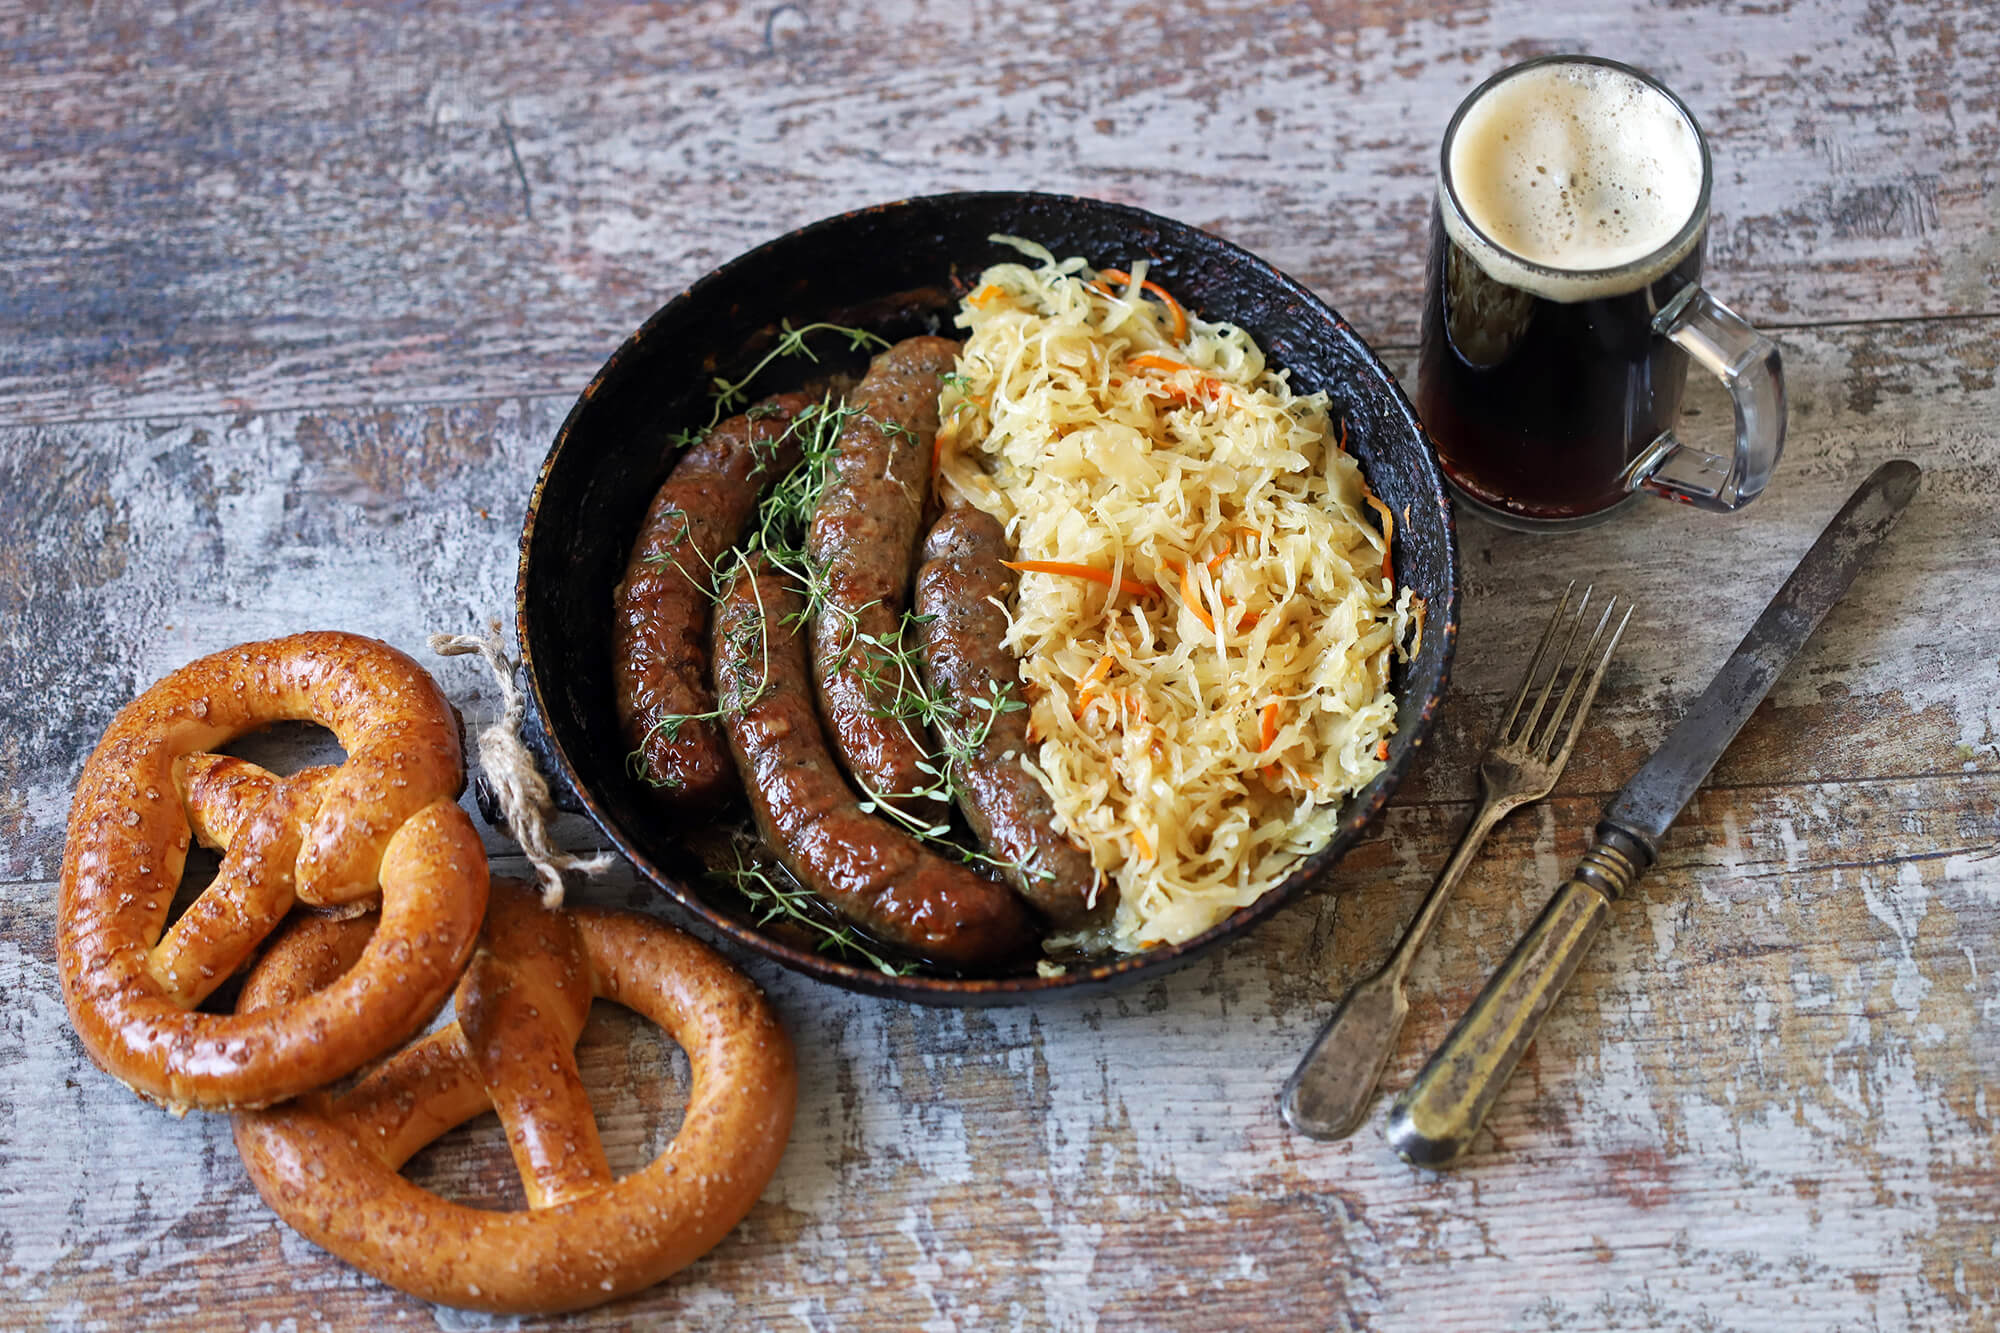 Traditional German meal of sausage and sauerkraut with pretzels and beer on the side 